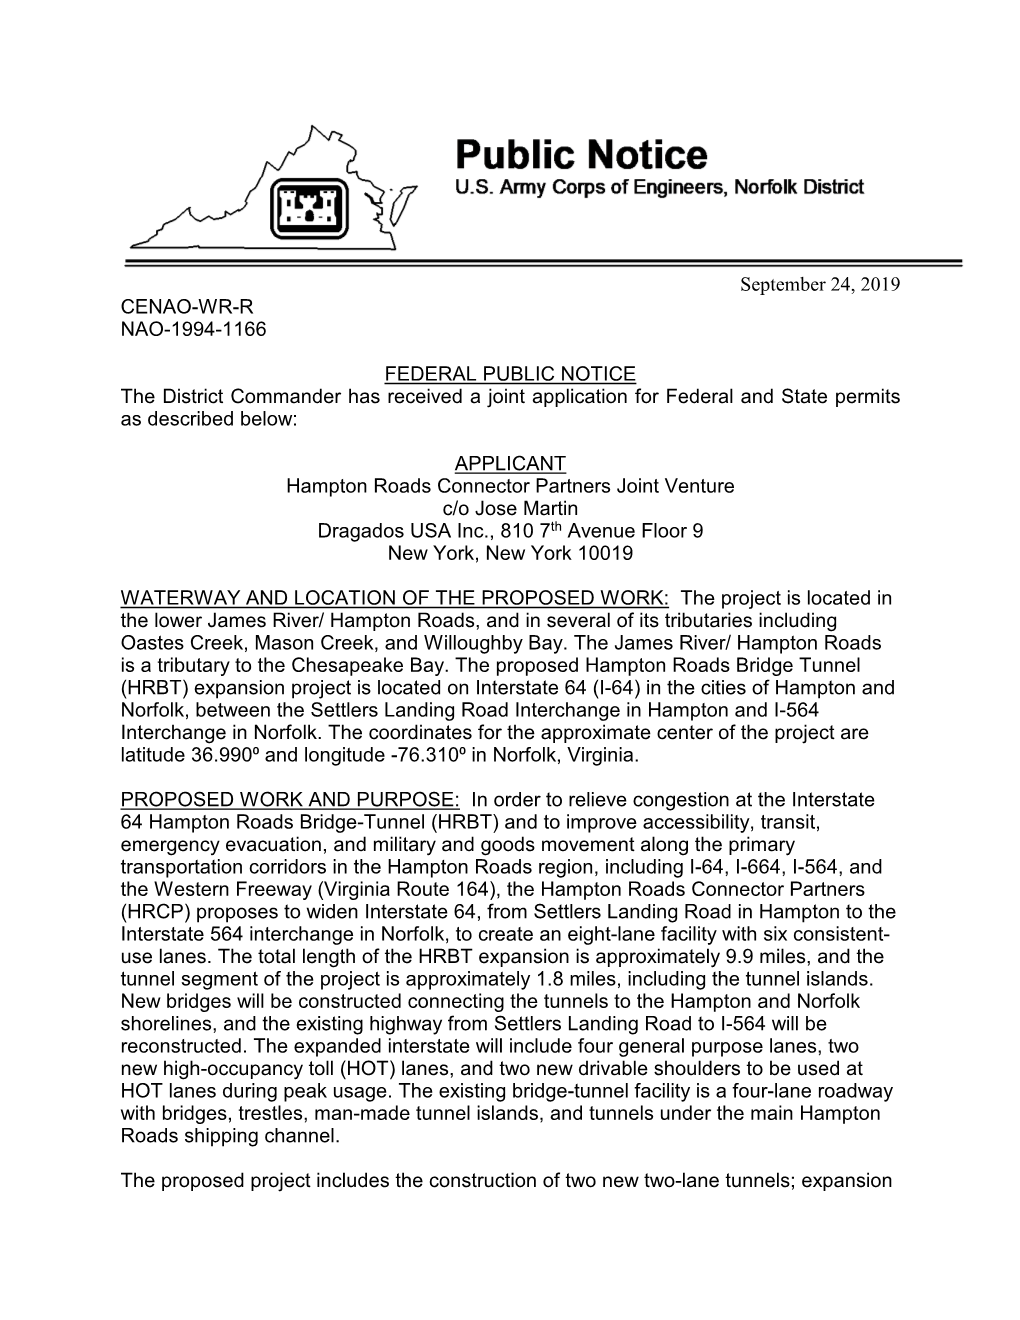 Corps 10 and 404 Public Notice